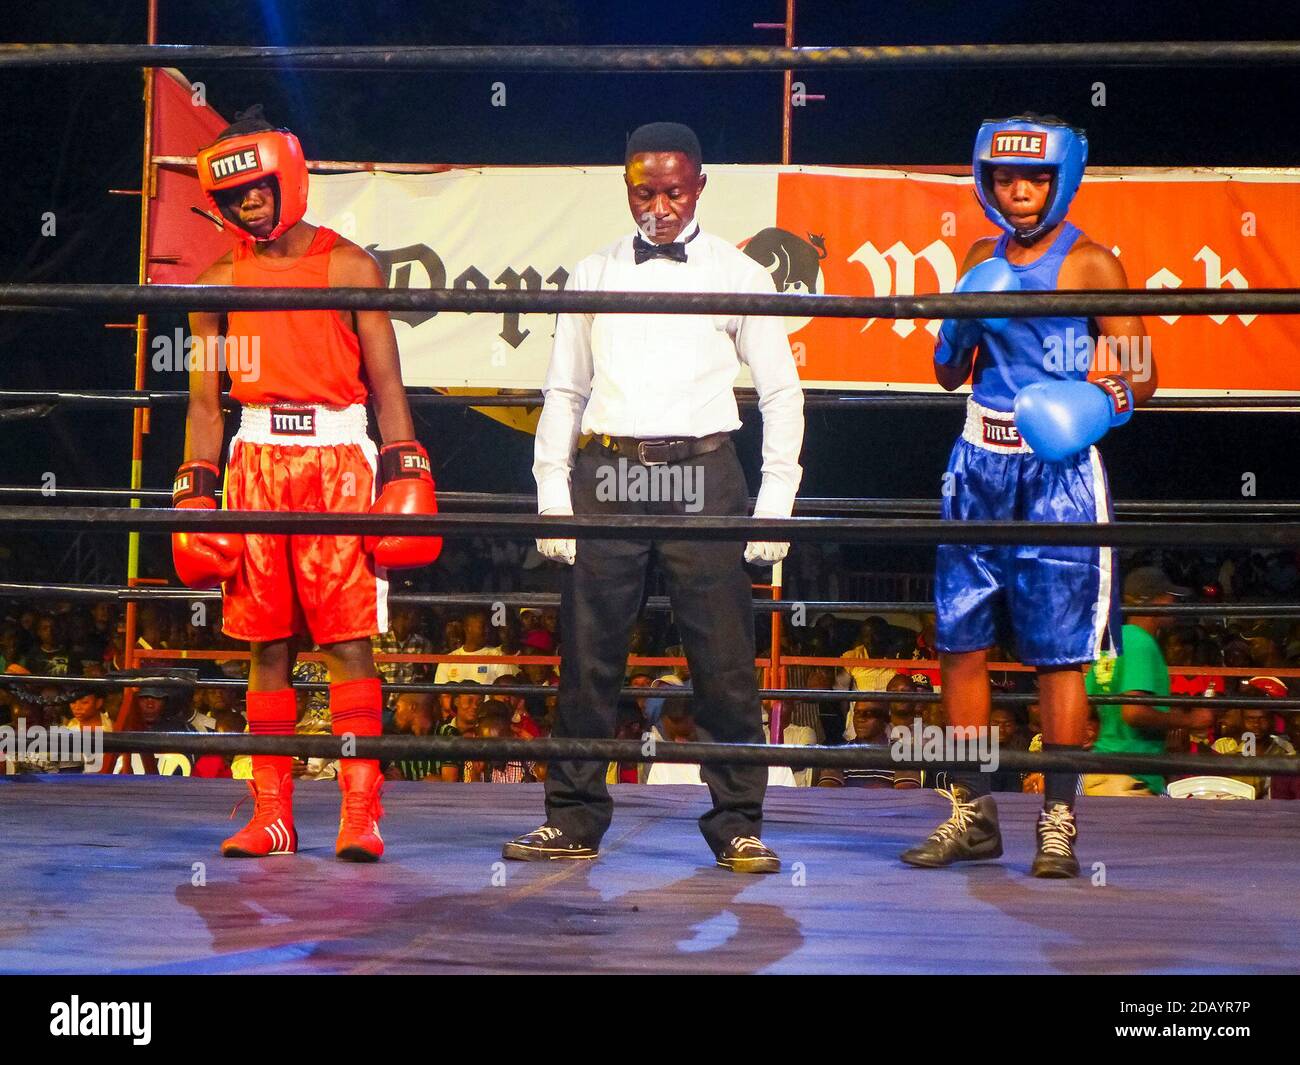 Two boxers wait in a boxing ring with a boxing referee in Kigali, Rwanda’s capital city. Stock Photo